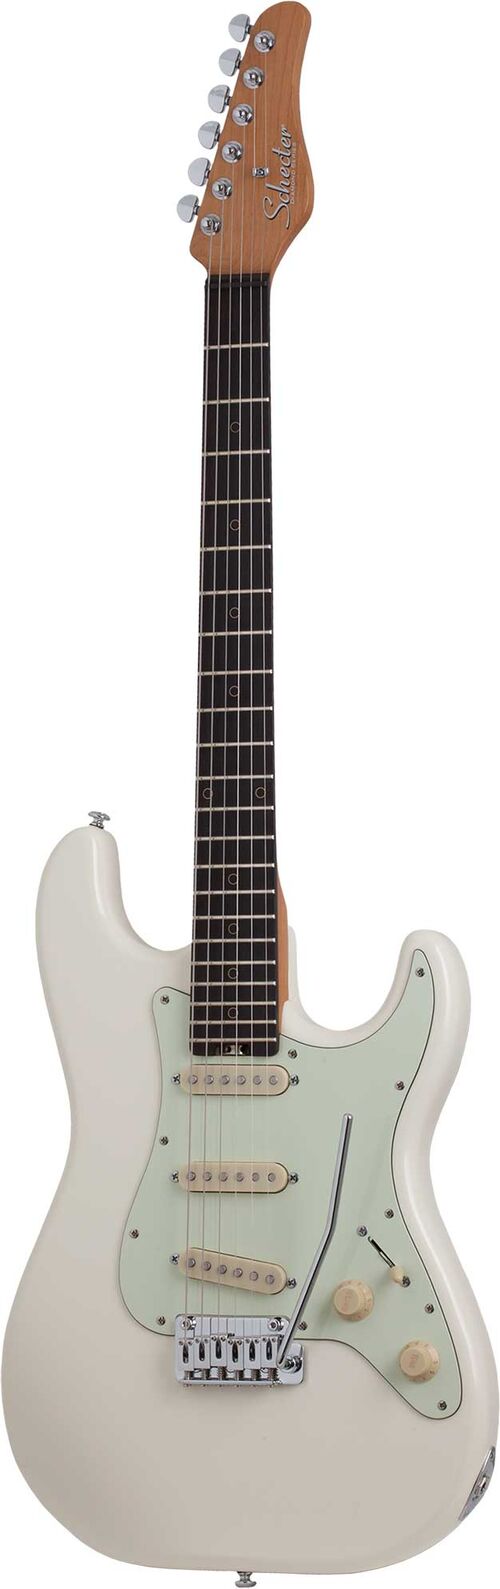 Nick Johnston Traditional Sss  Schecter